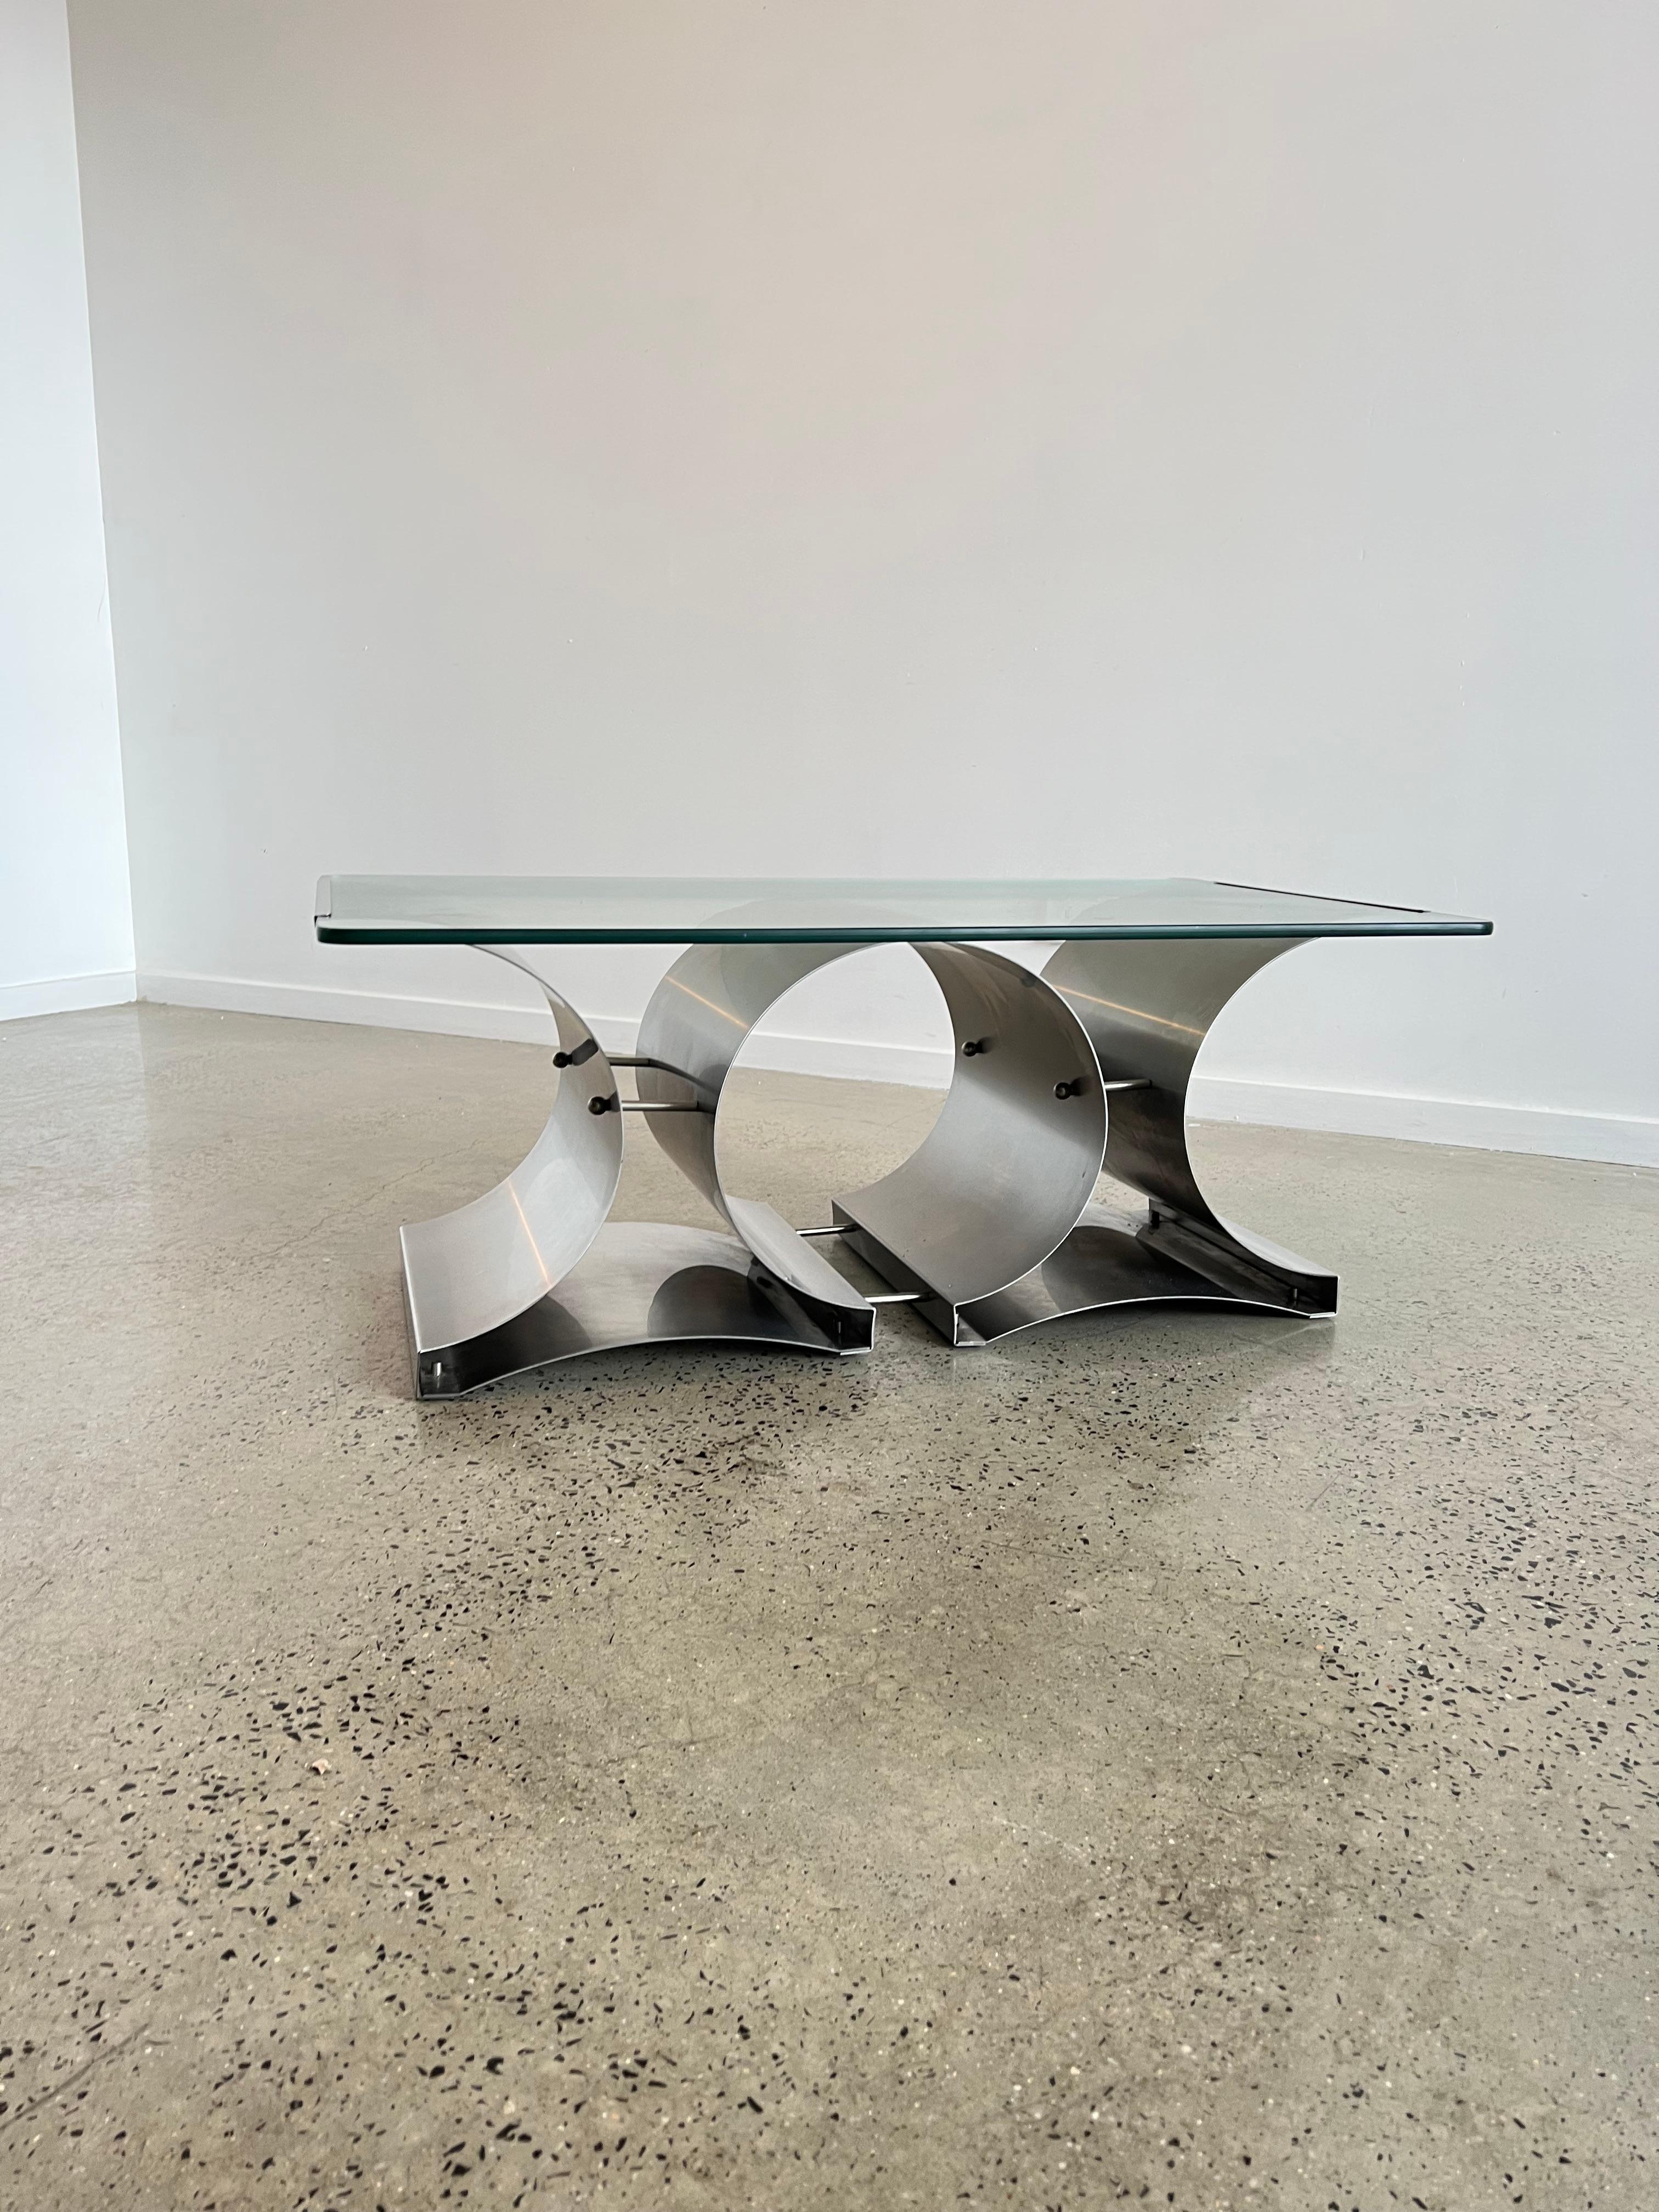 Space Age vintage coffee table or sofa table from stainless steel and clear glass designed by Francois Monnet for Kappa.
France, circa 1970.
This sleek and futuristic design shows a stainless steel construction with a clear glass plate, which is